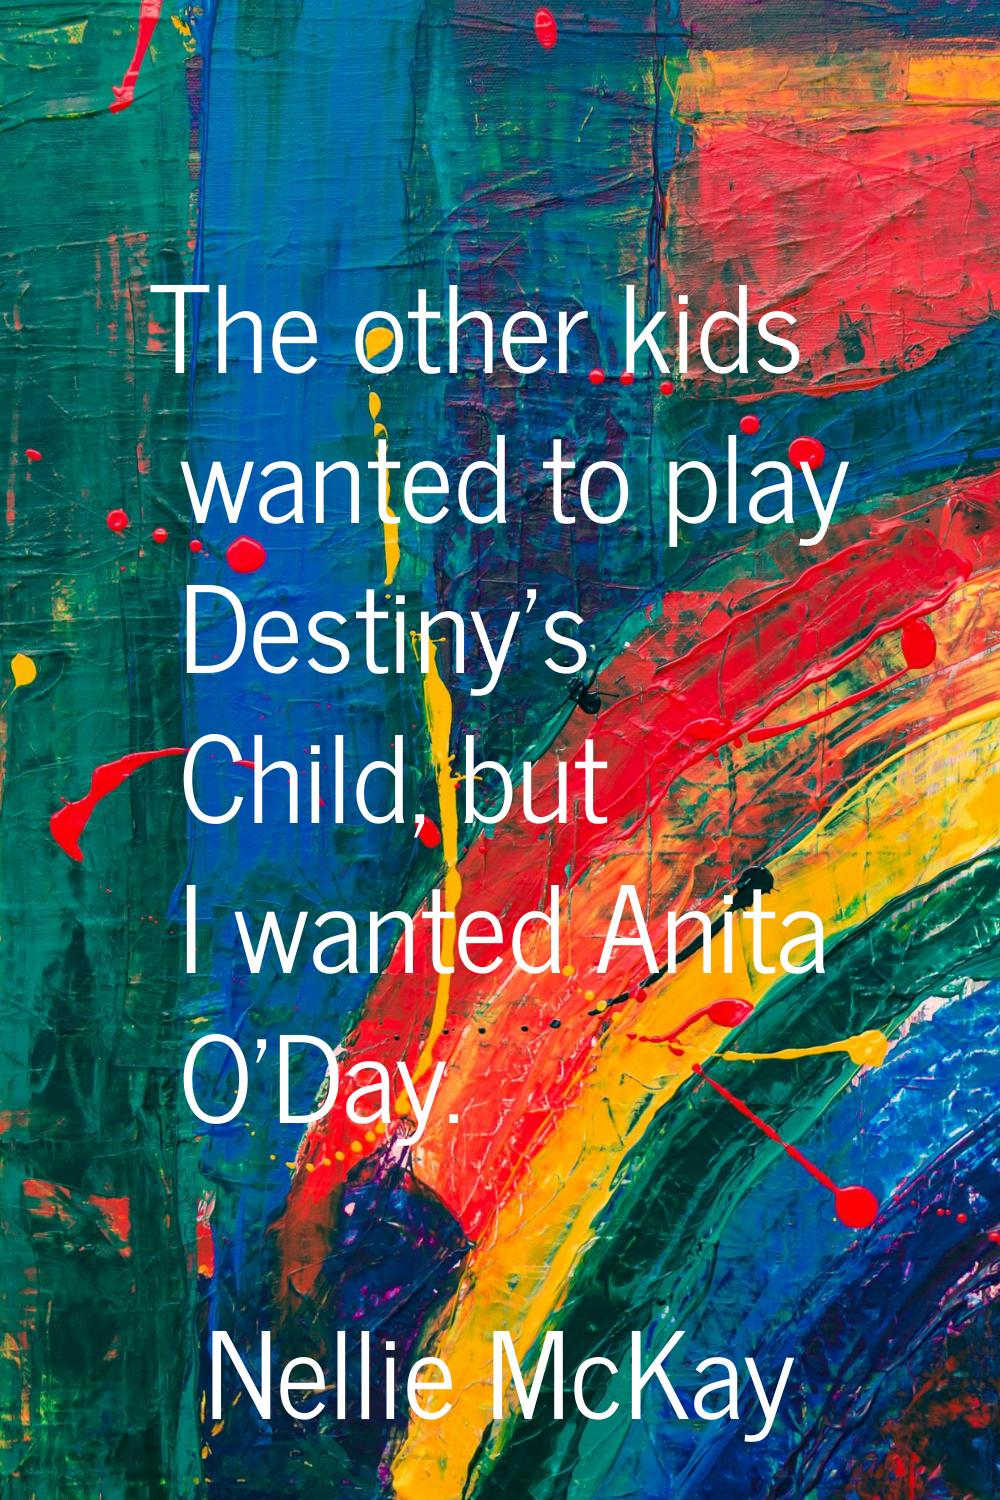 The other kids wanted to play Destiny's Child, but I wanted Anita O'Day.